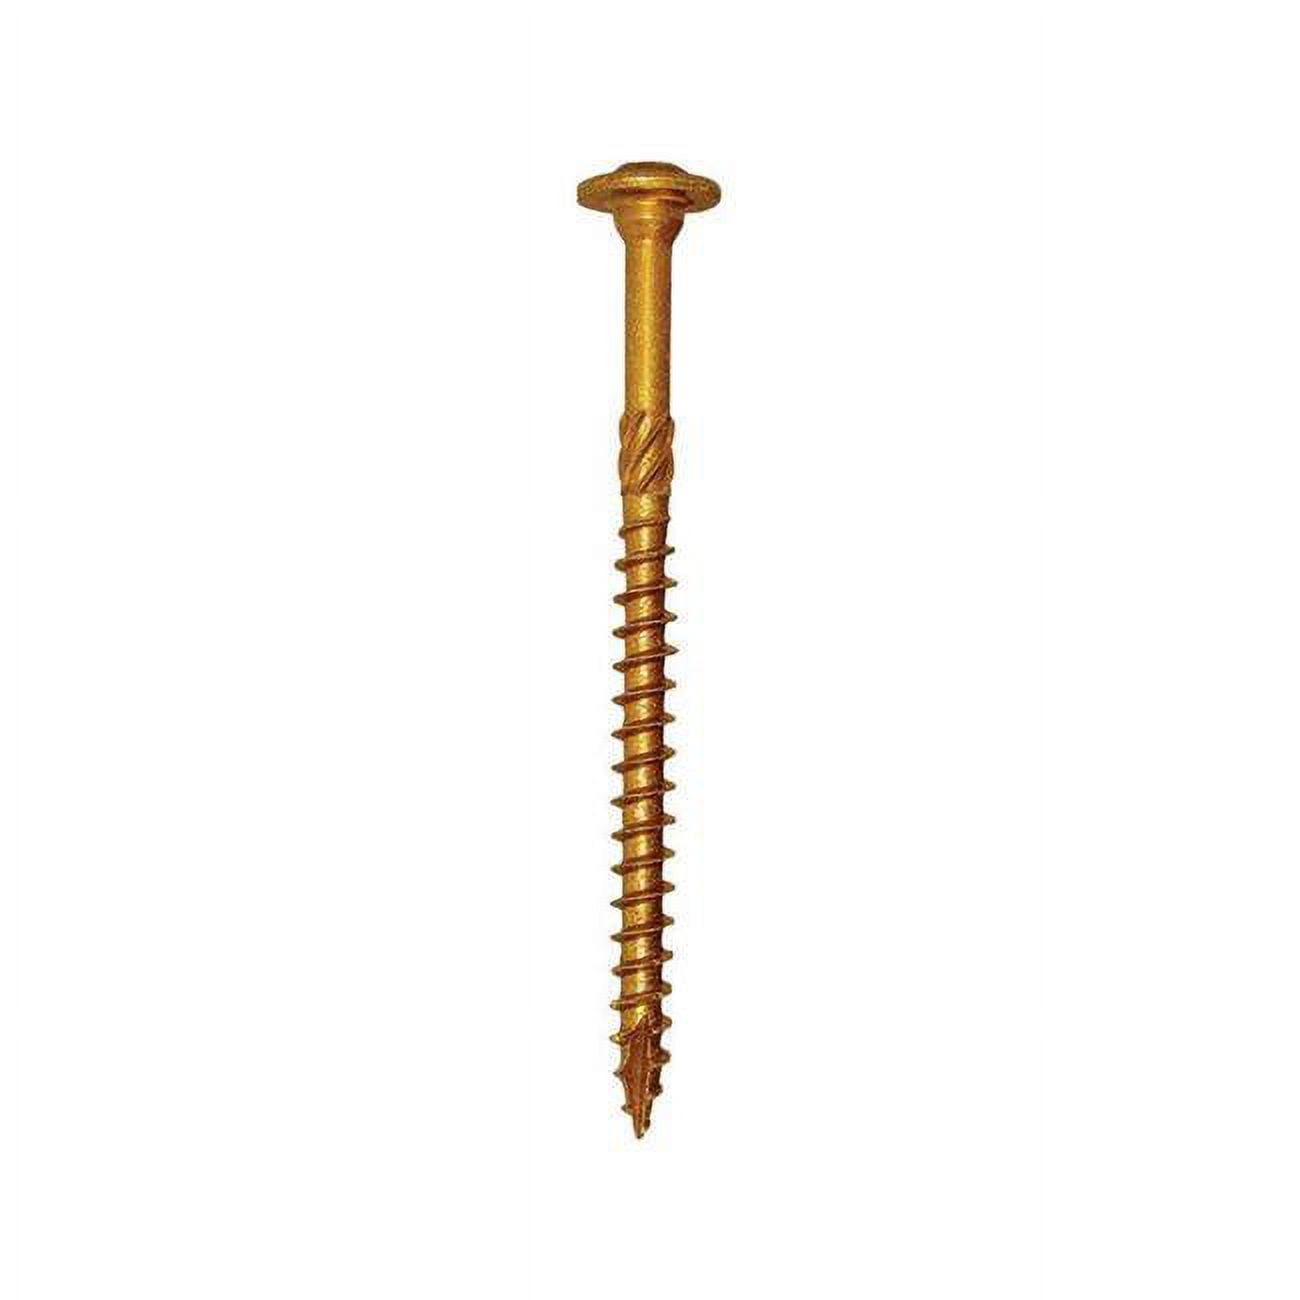 Picture of GRK Fasteners 5914007 0.37 x 10 in. Star Self Tapping Zinc Construction Screws, Yellow